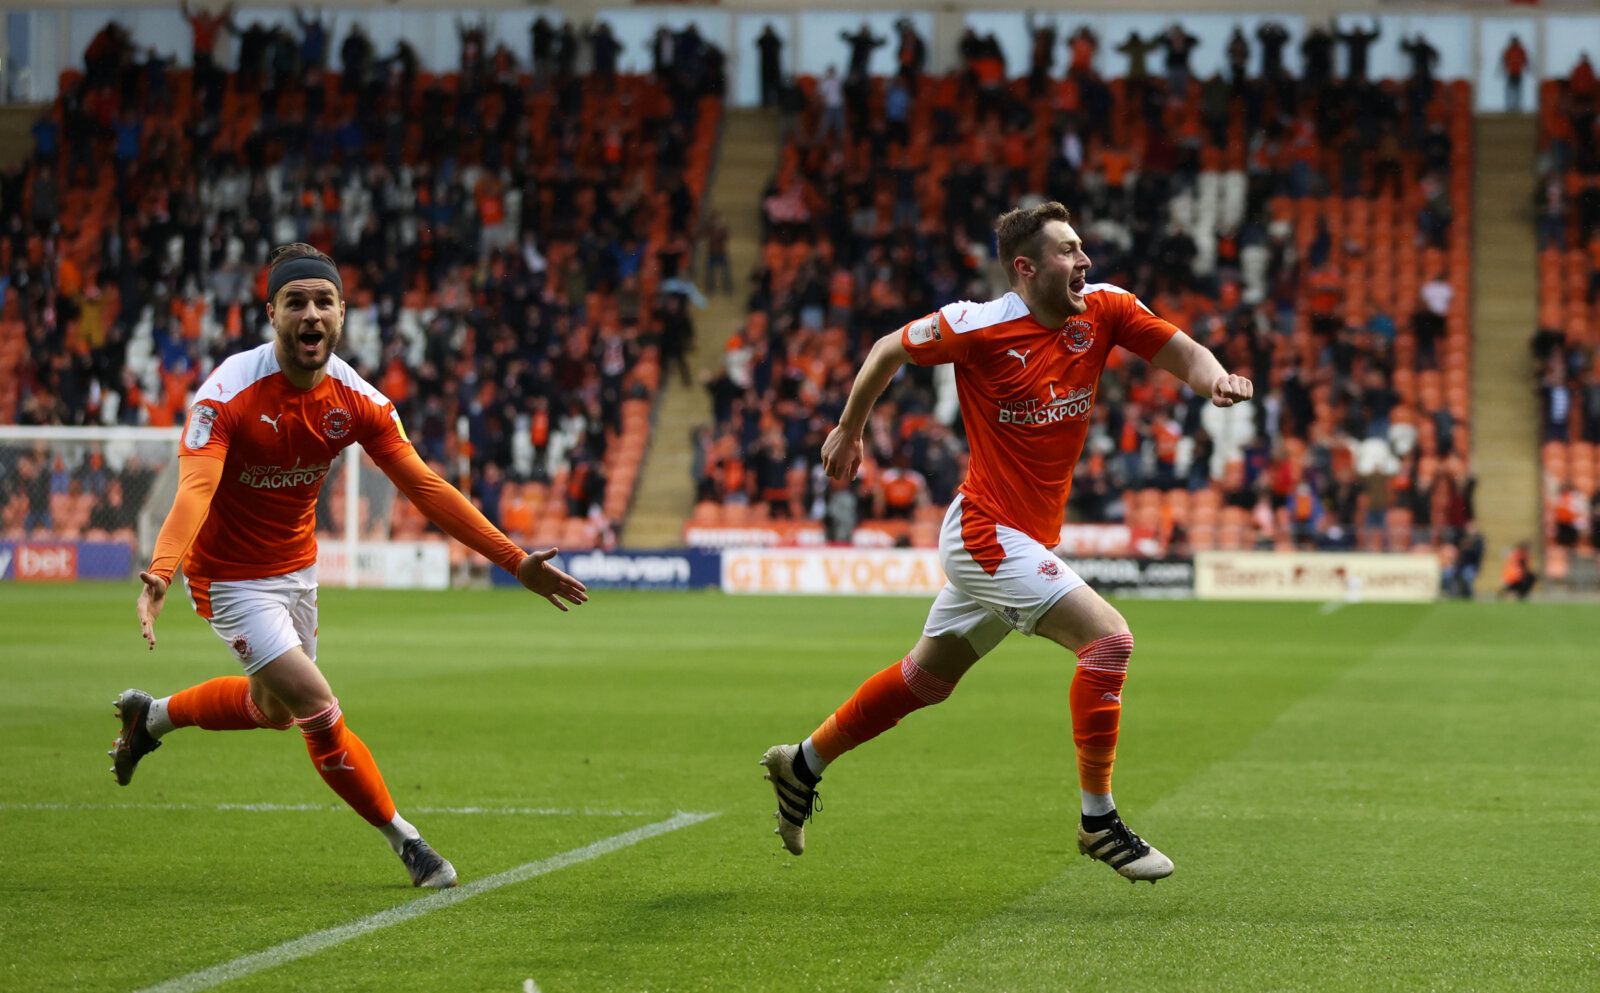 Soccer Football - League One Play-Off Semi Final Second Leg - Blackpool v Oxford United - Bloomfield Road Stadium, Blackpool, Britain - May 21, 2021 Blackpool's Eliot Embleton celebrates scoring their first goal Action Images/Molly Darlington EDITORIAL USE ONLY. No use with unauthorized audio, video, data, fixture lists, club/league logos or 'live' services. Online in-match use limited to 75 images, no video emulation. No use in betting, games or single club /league/player publications.  Please 